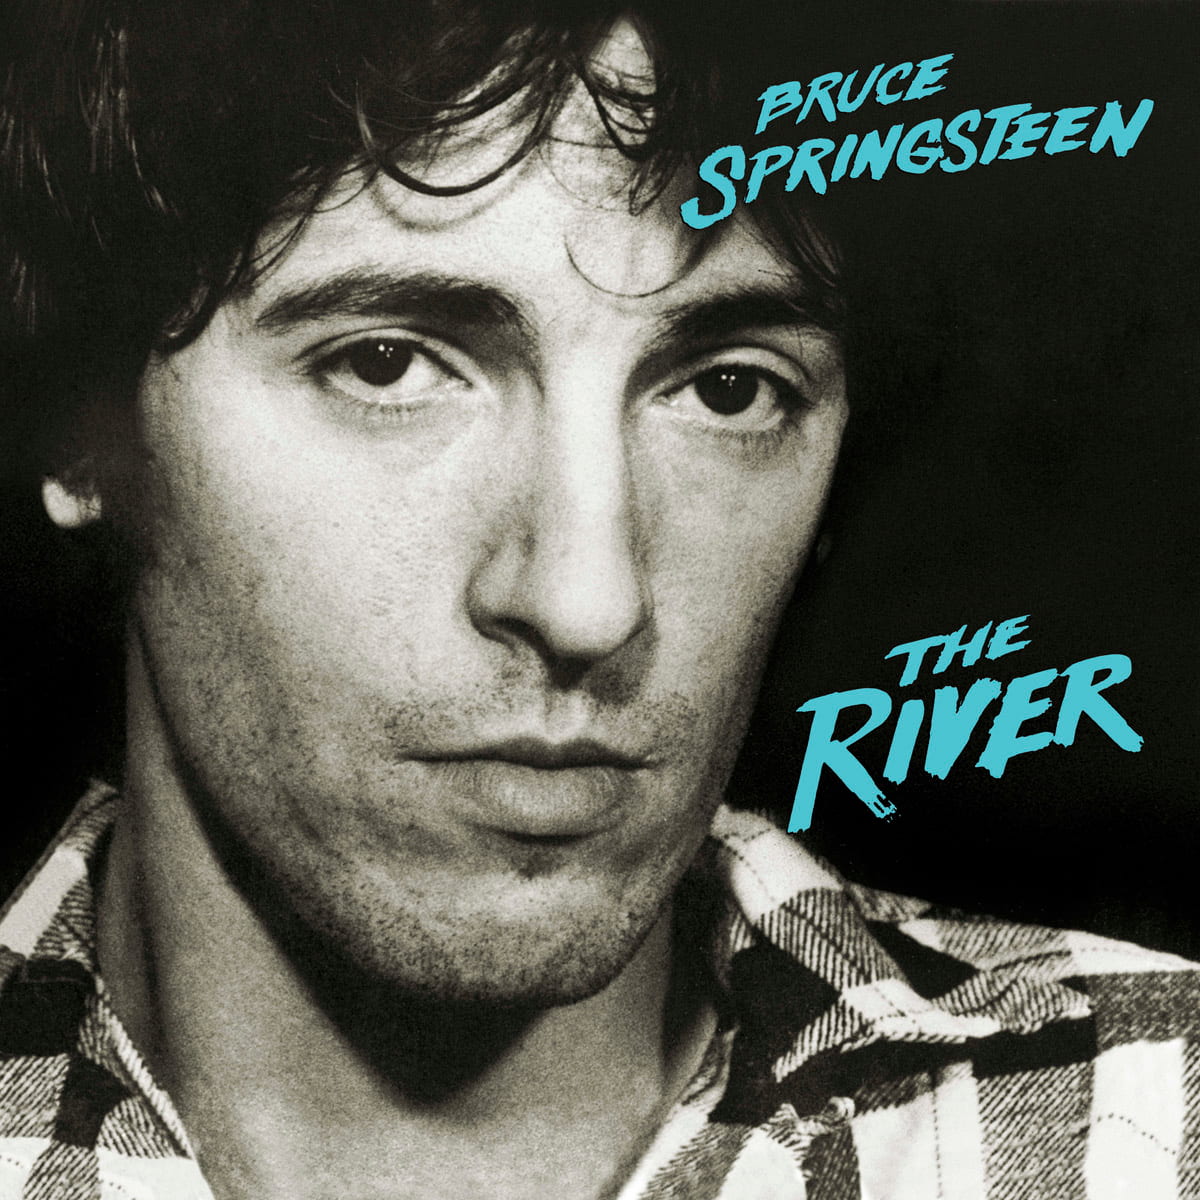 Bruce Springsteen The River front cover